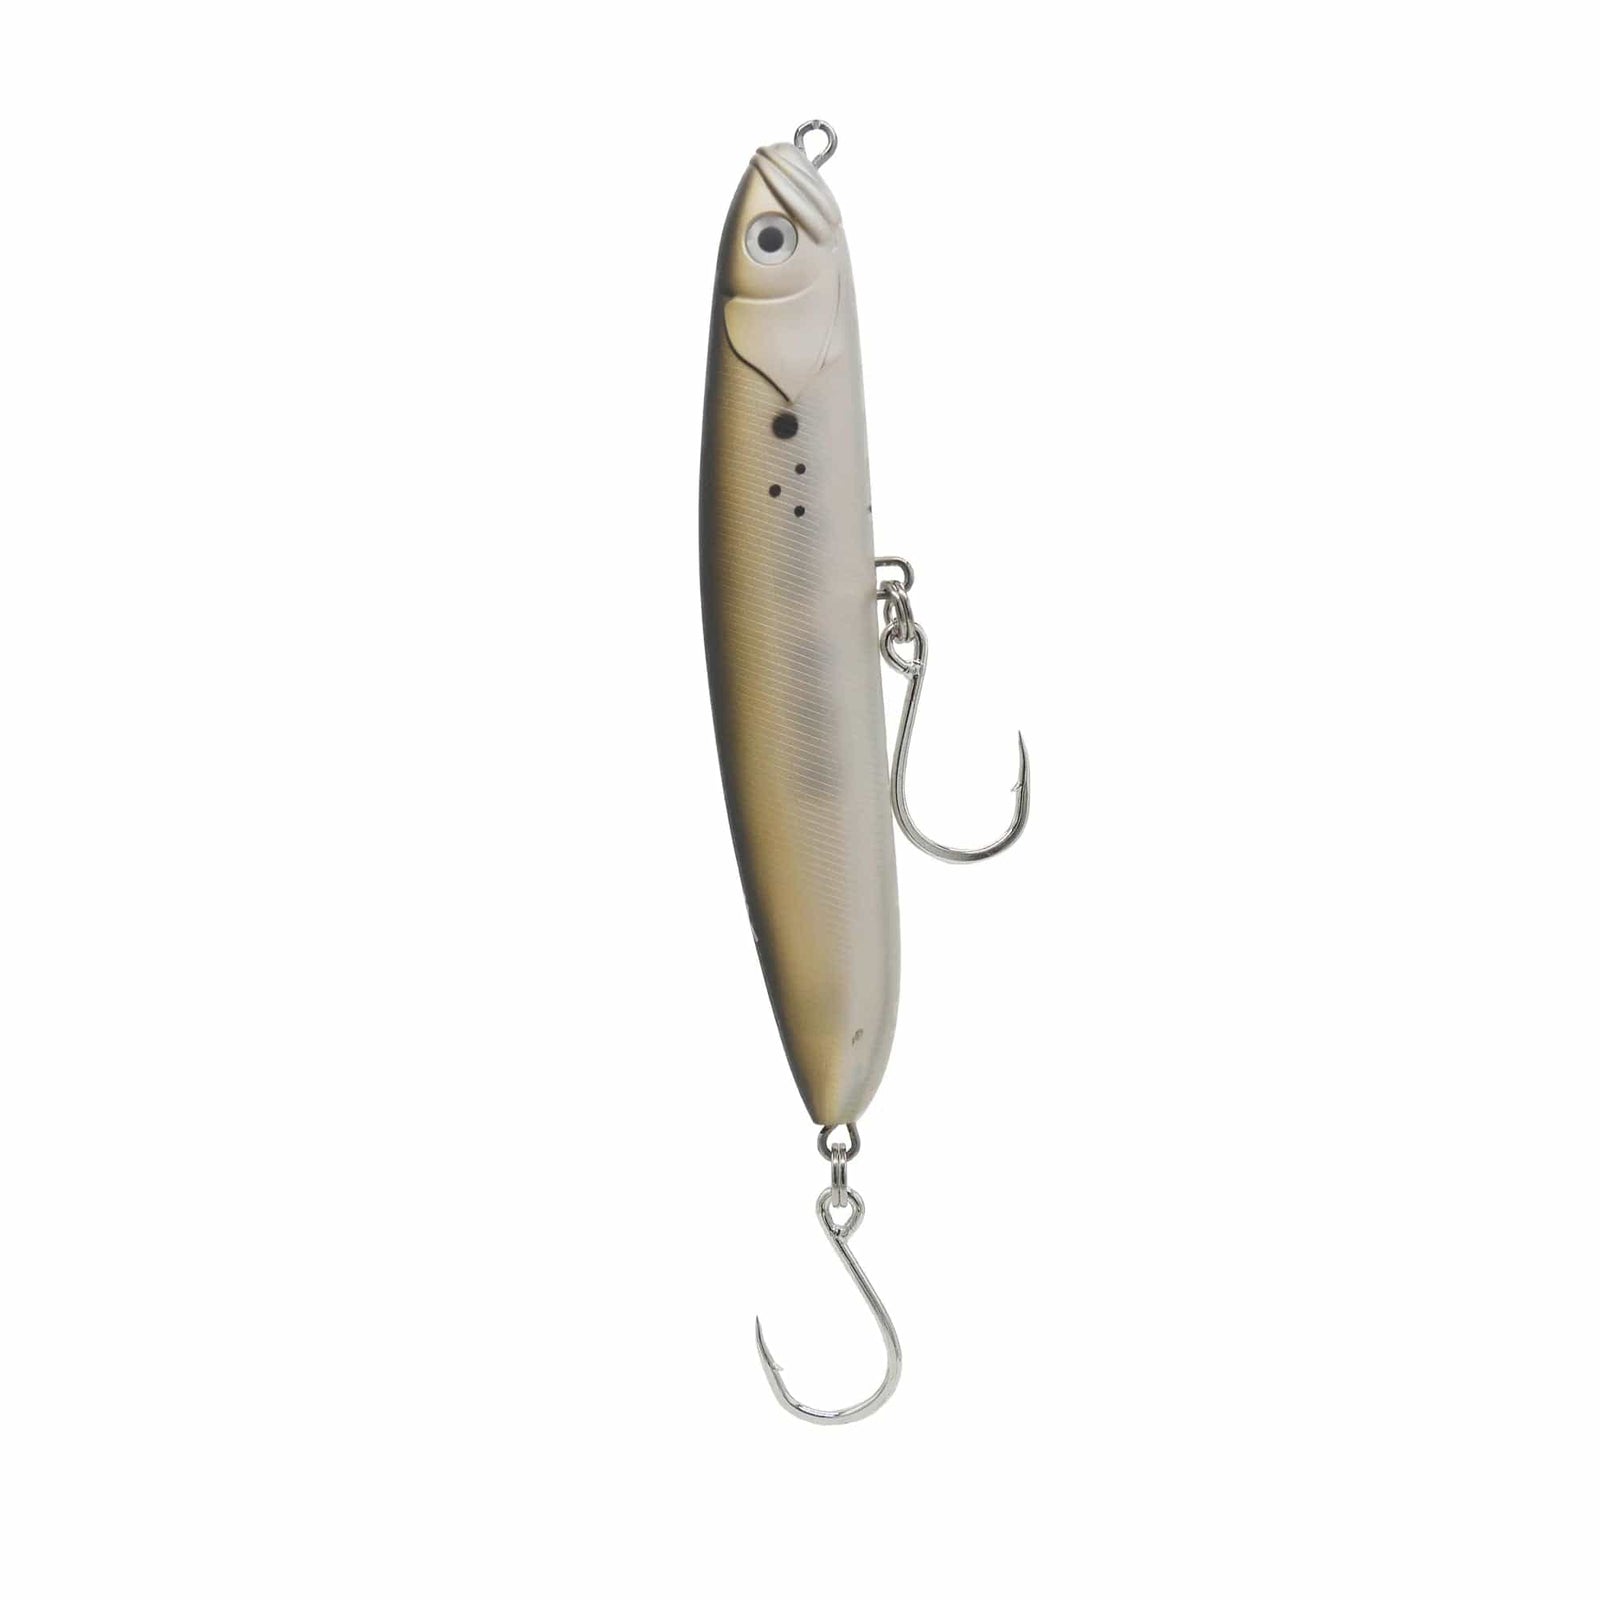 Albie Lures - The Saltwater Edge